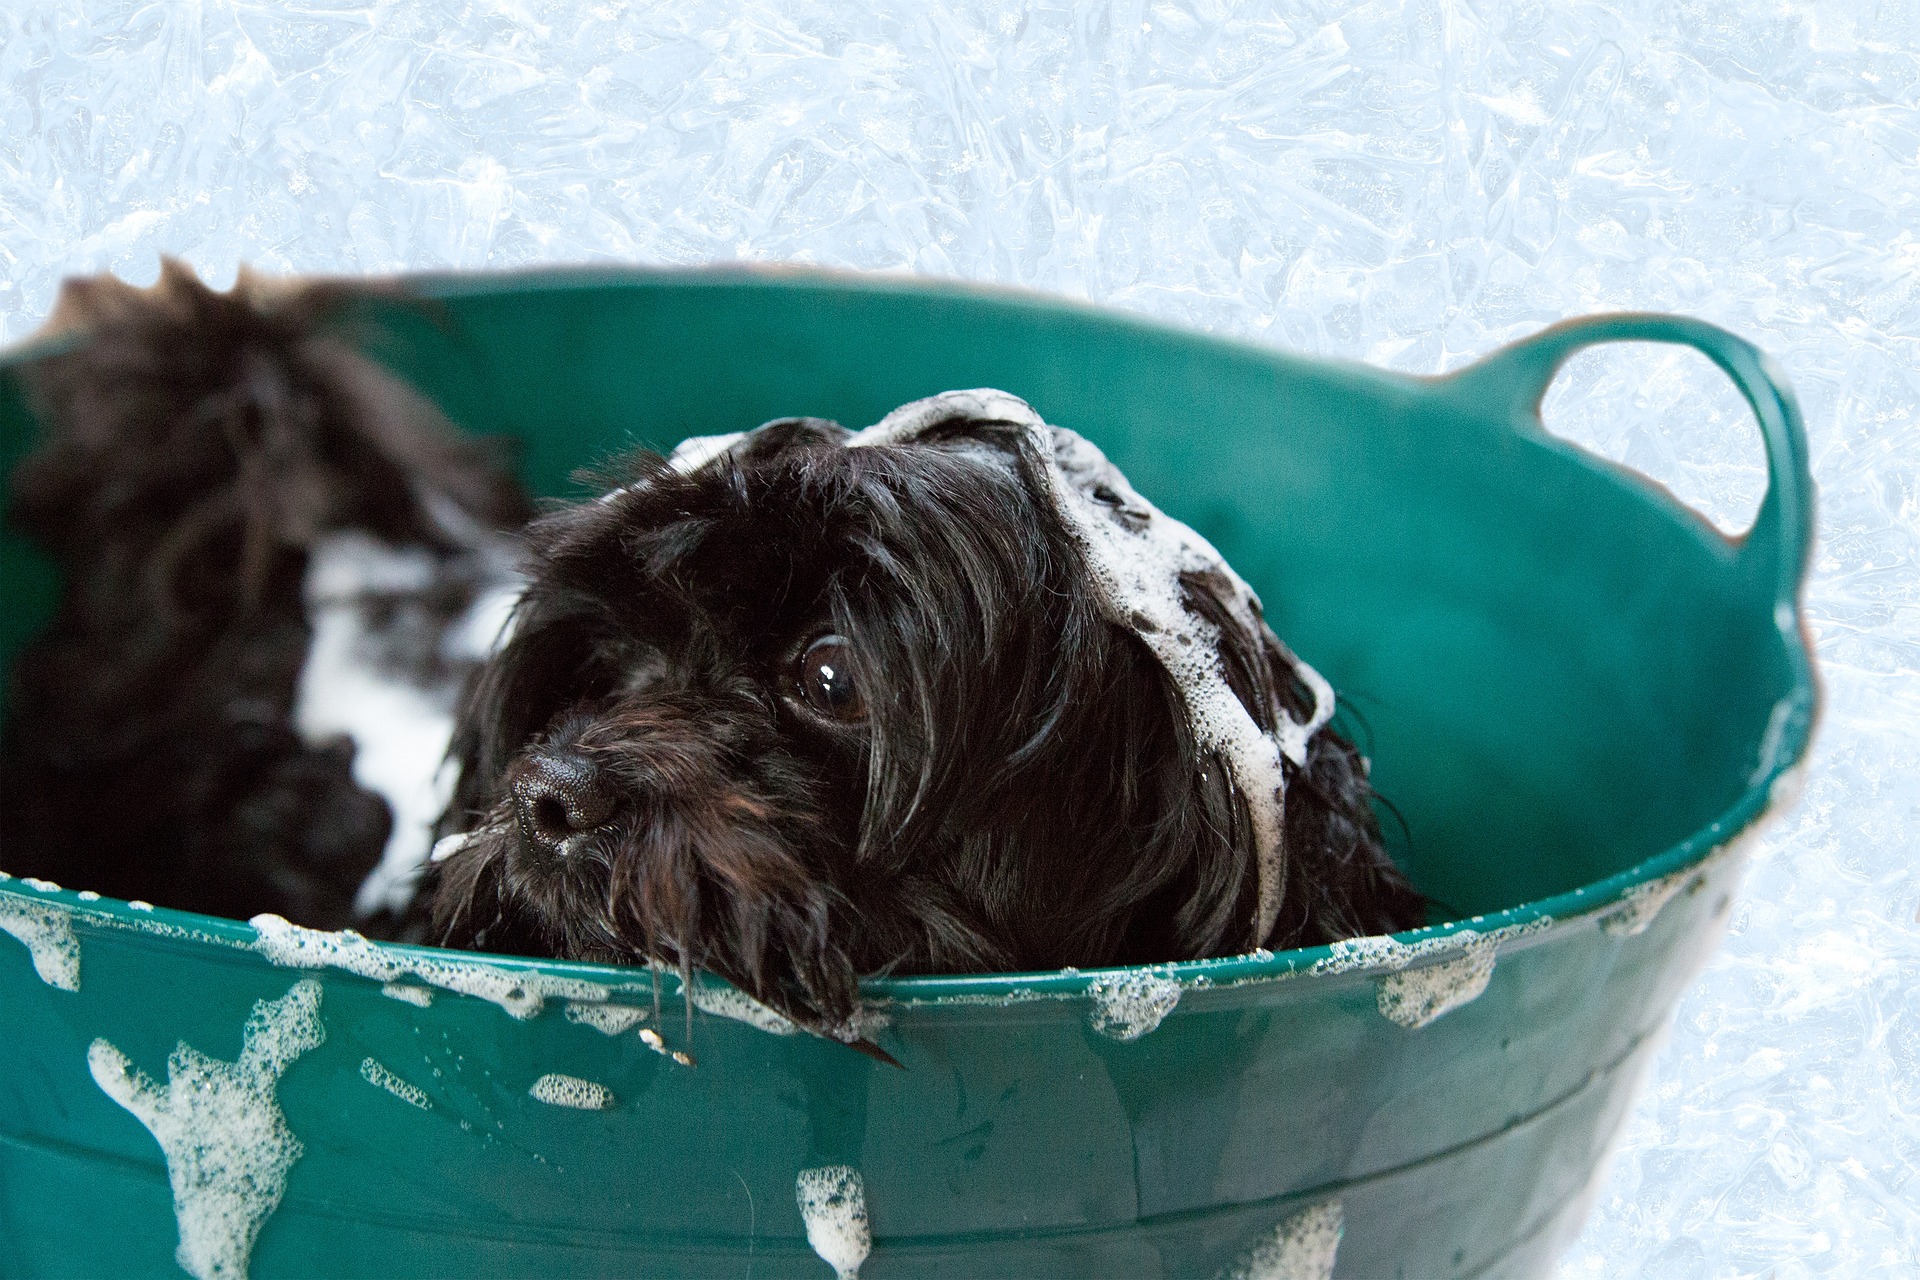 Black dog in green tub with suds.